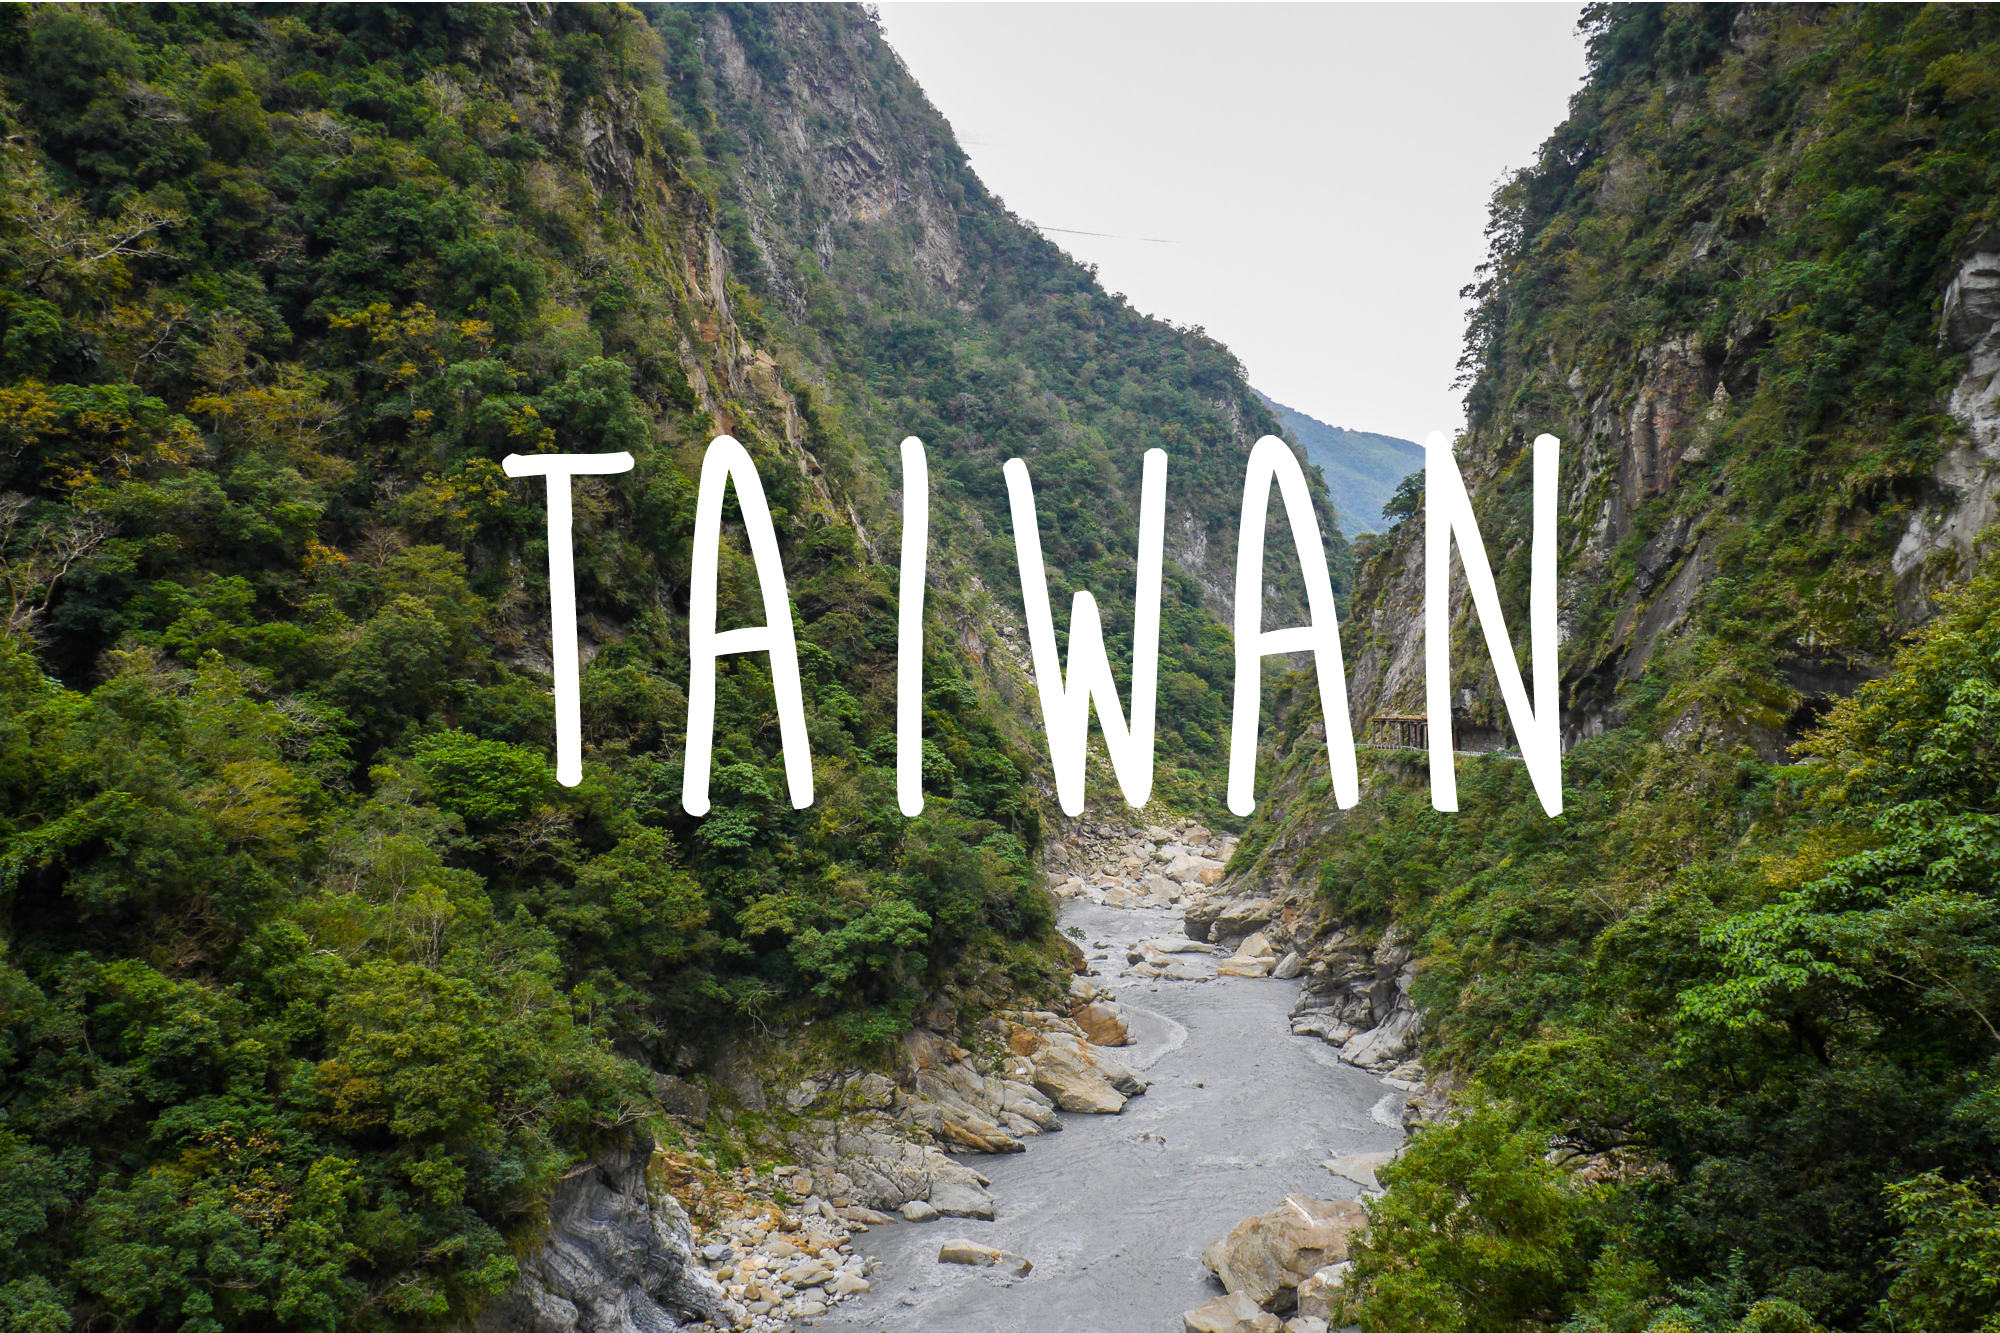 A trip to the Heart of Asia, Taiwan